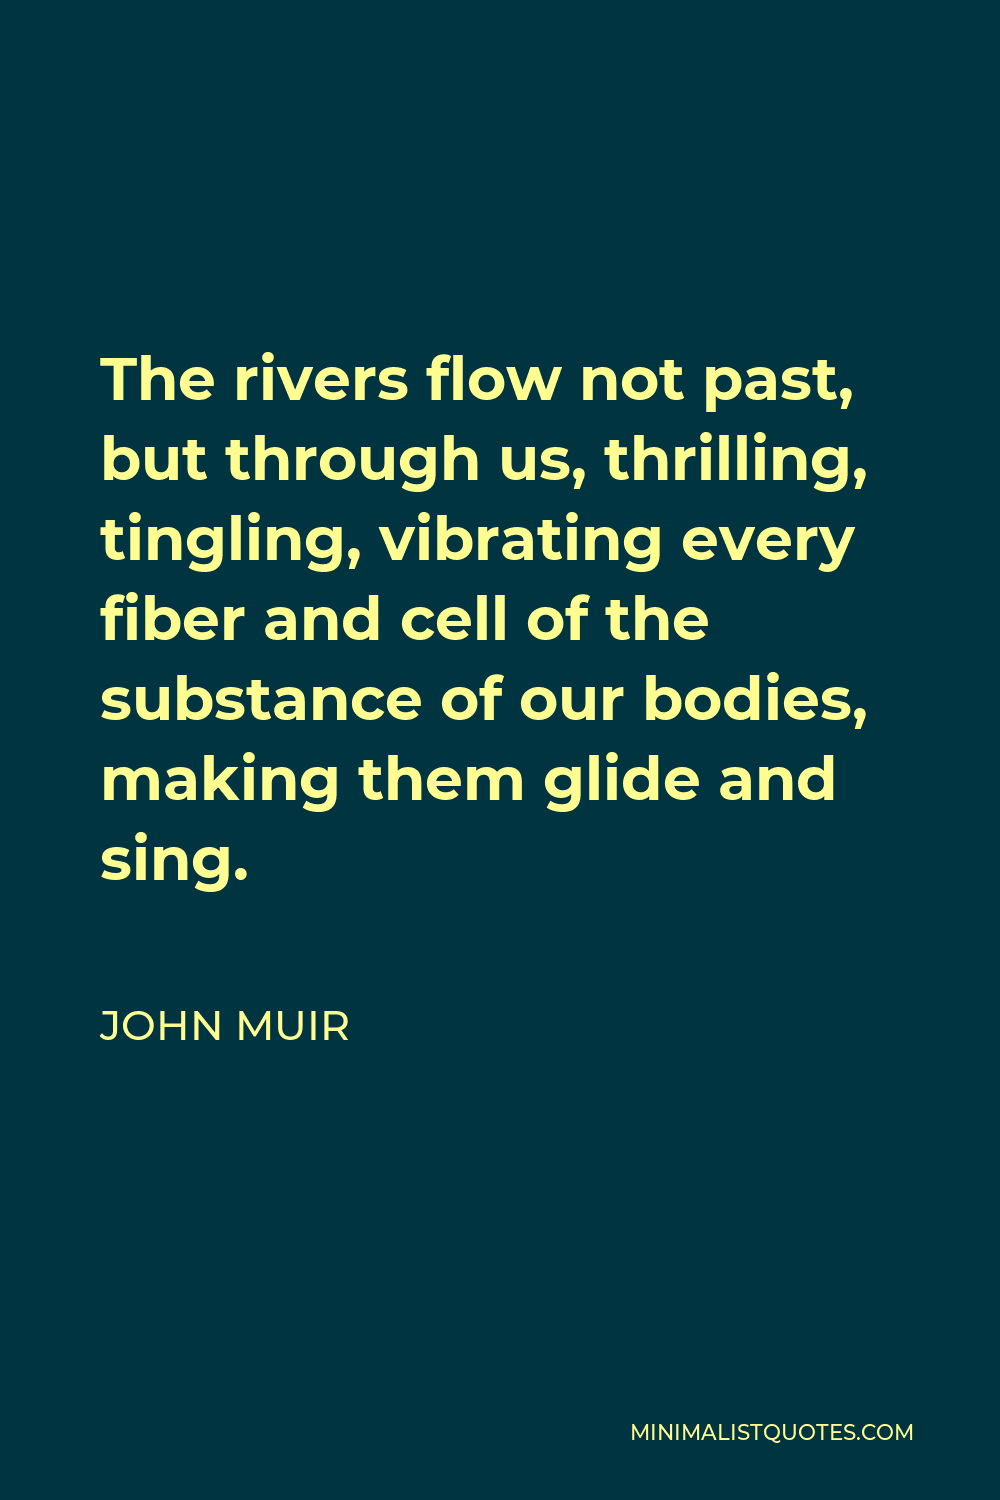 John Muir Quote: The rivers flow not past, but through us, thrilling ...